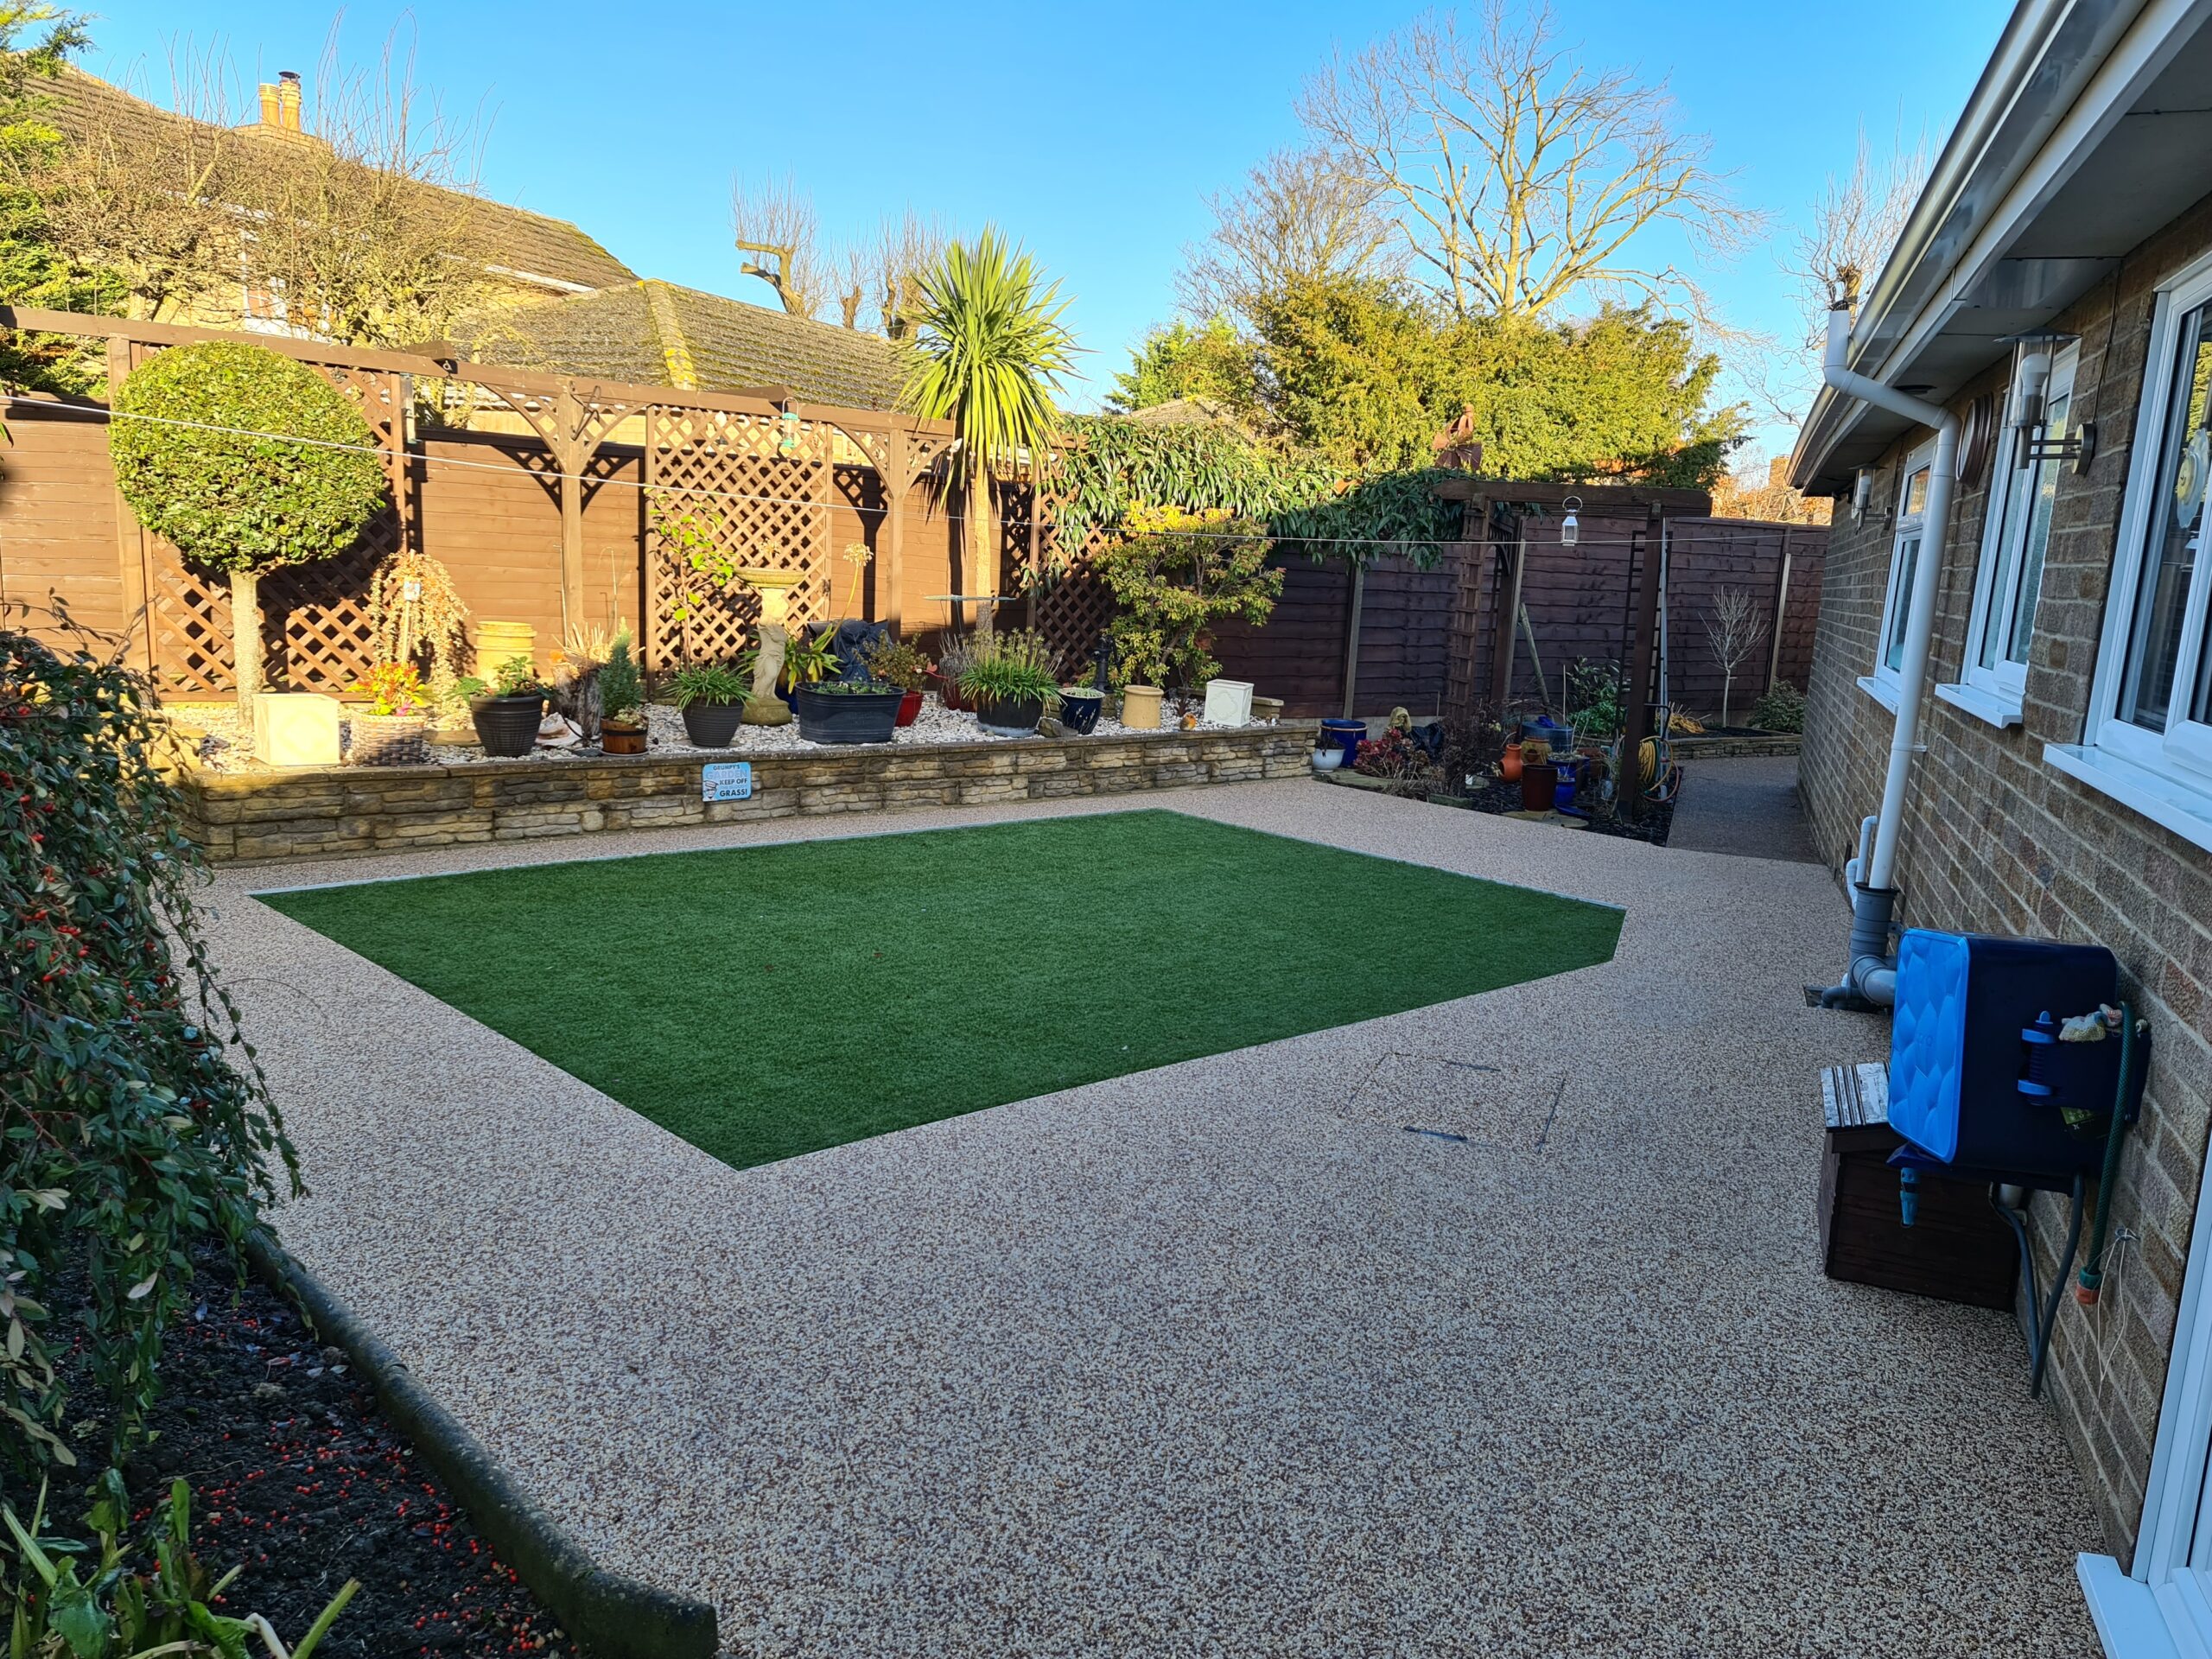 Peterborough's No.1 Installer of Resin Bound and Block Paved Driveways